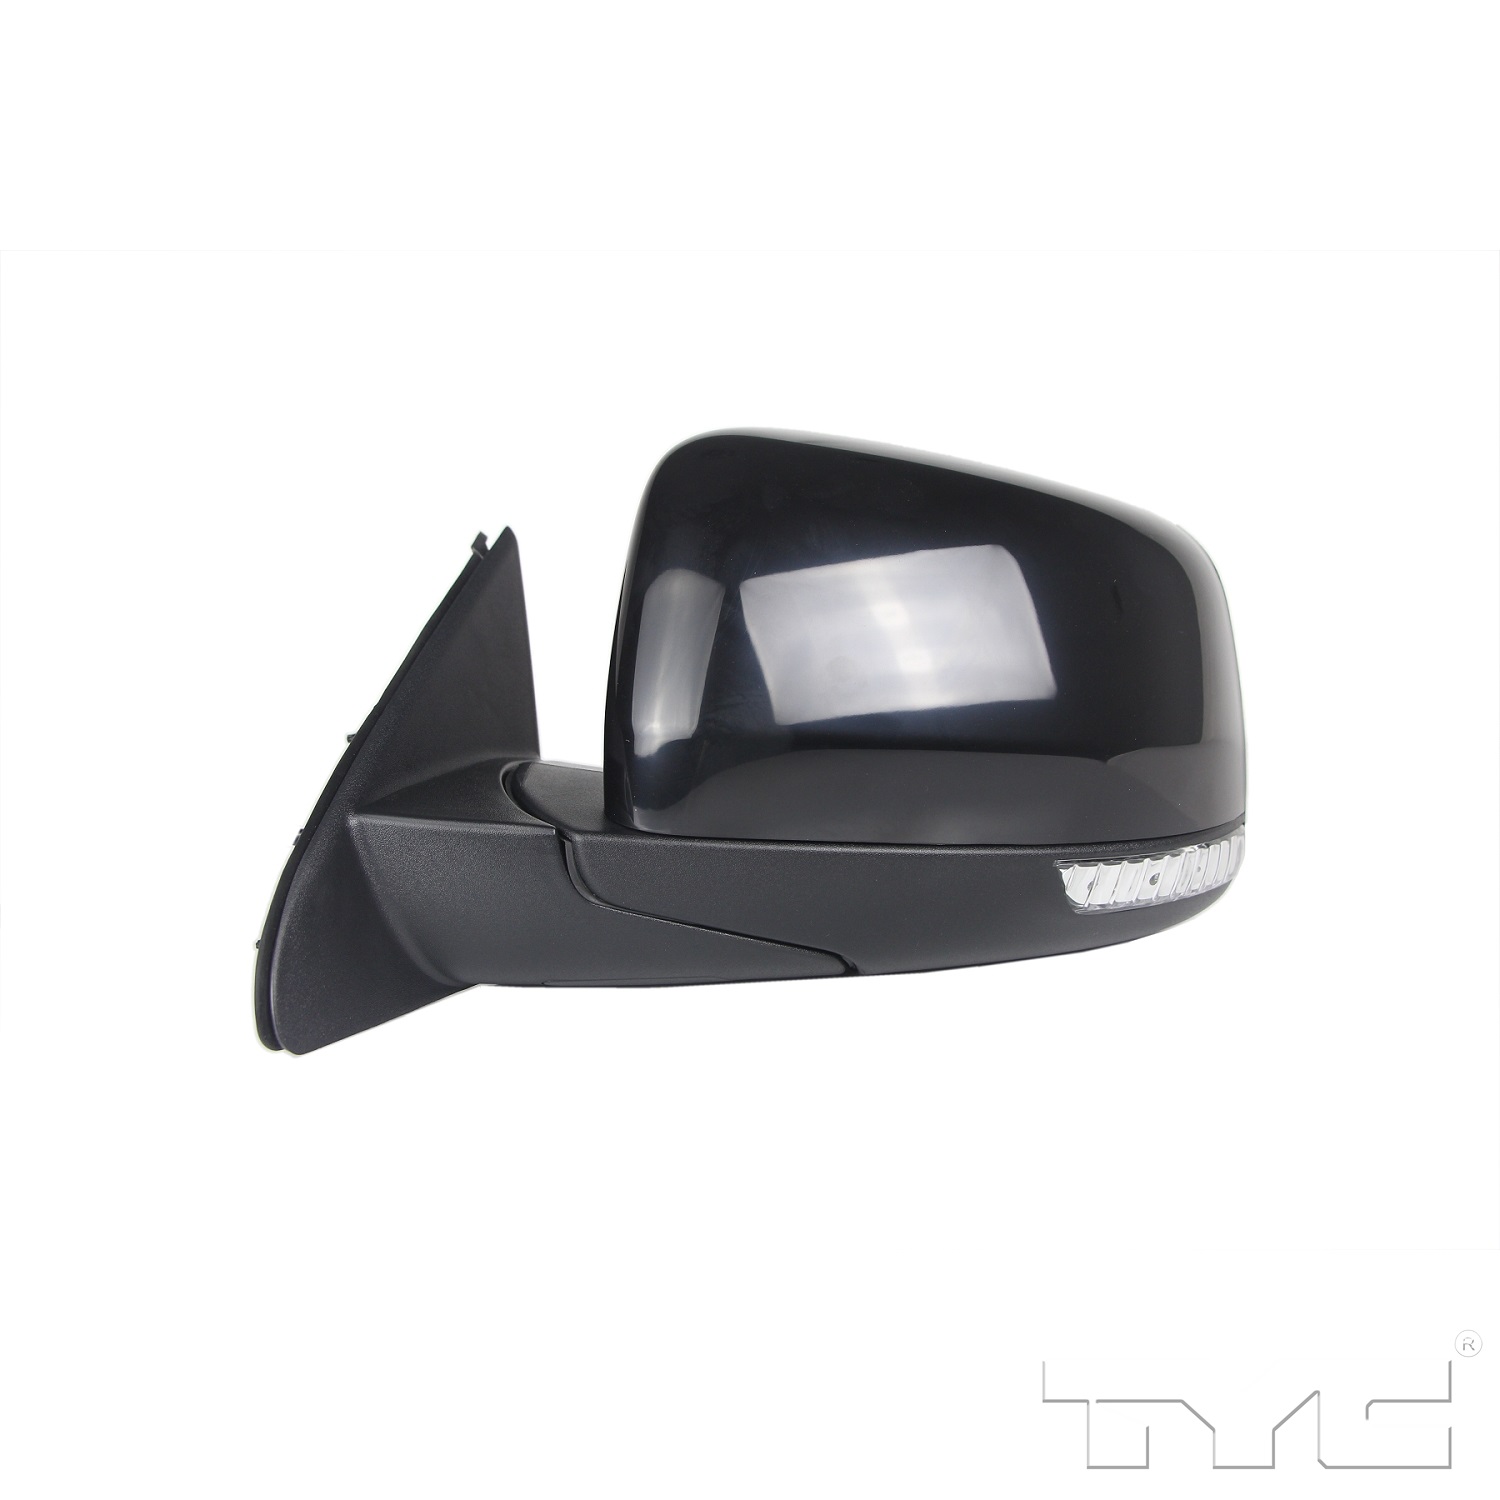 Aftermarket MIRRORS for JEEP - GRAND CHEROKEE, GRAND CHEROKEE,14-21,LT Mirror outside rear view